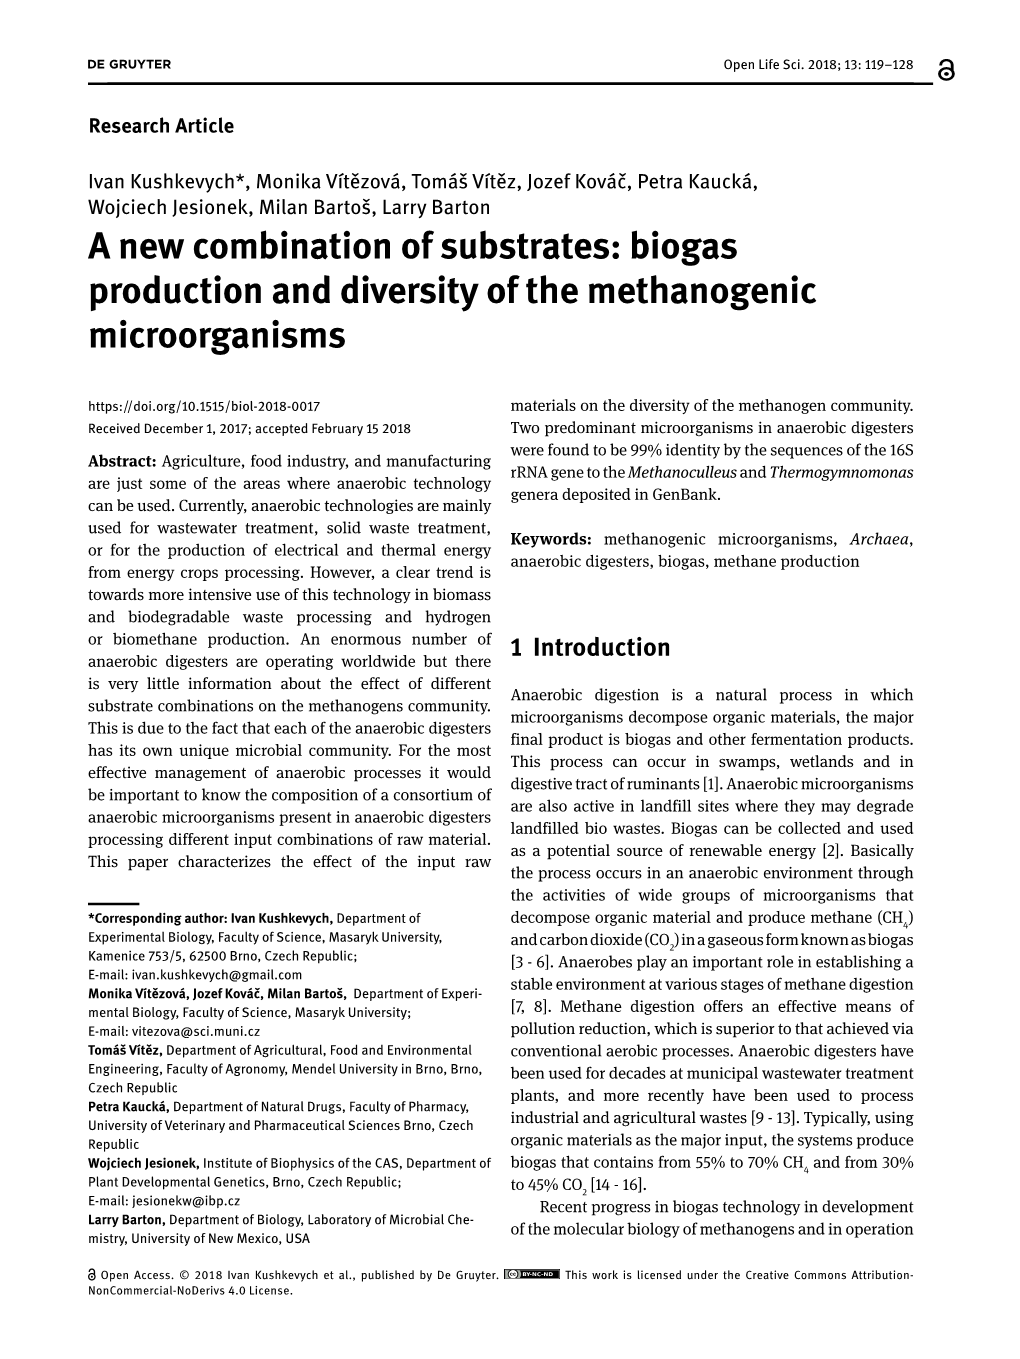 Biogas Production and Diversity of the Methanogenic Microorganisms Materials on the Diversity of the Methanogen Community